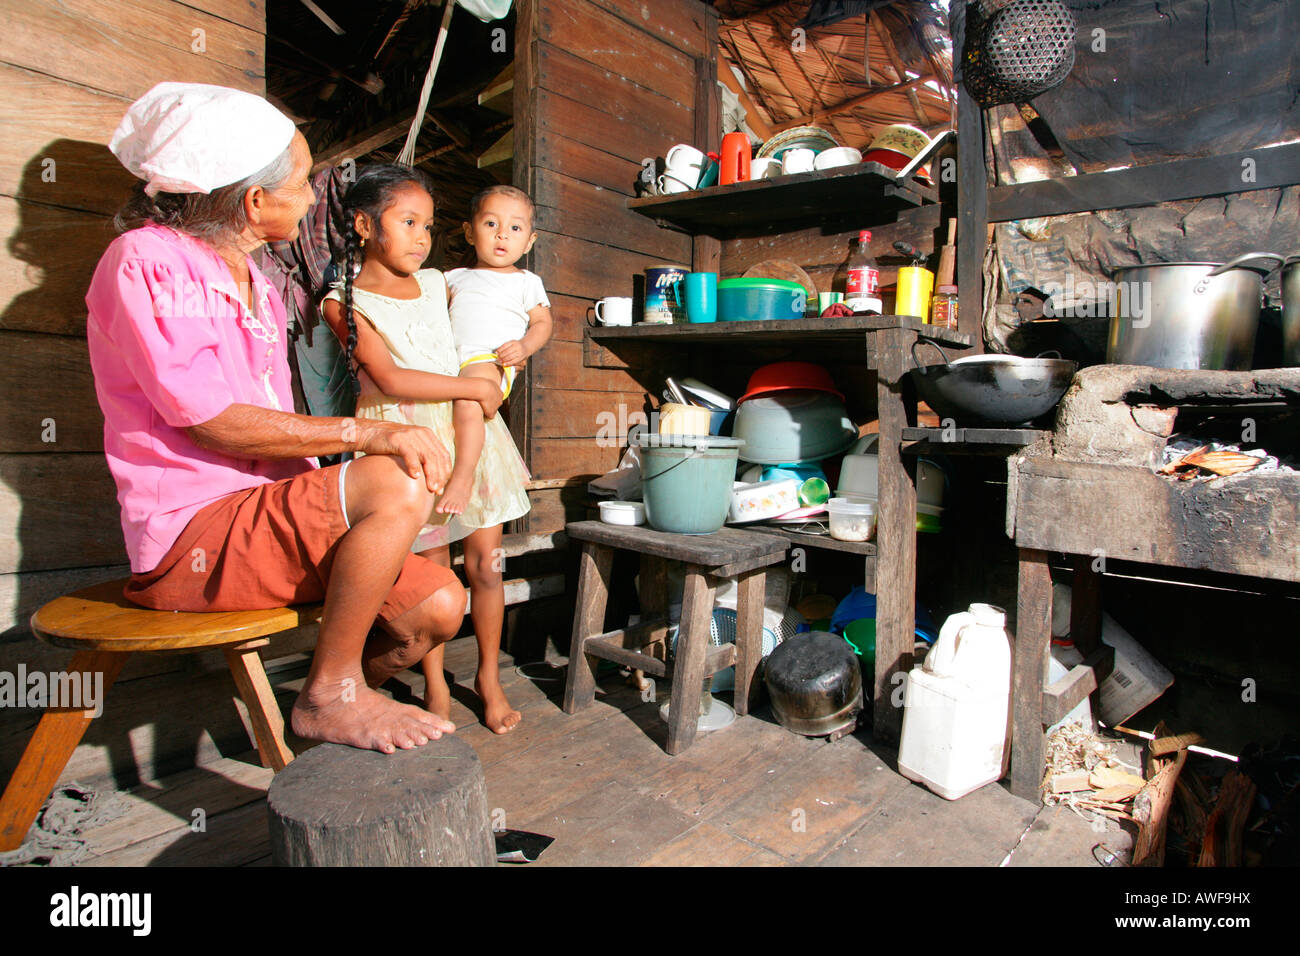 Grandmother with grandchildren in the kitchen, Amerindians of the Arawak tribe, Santa Mission, Guyana, South America Stock Photo